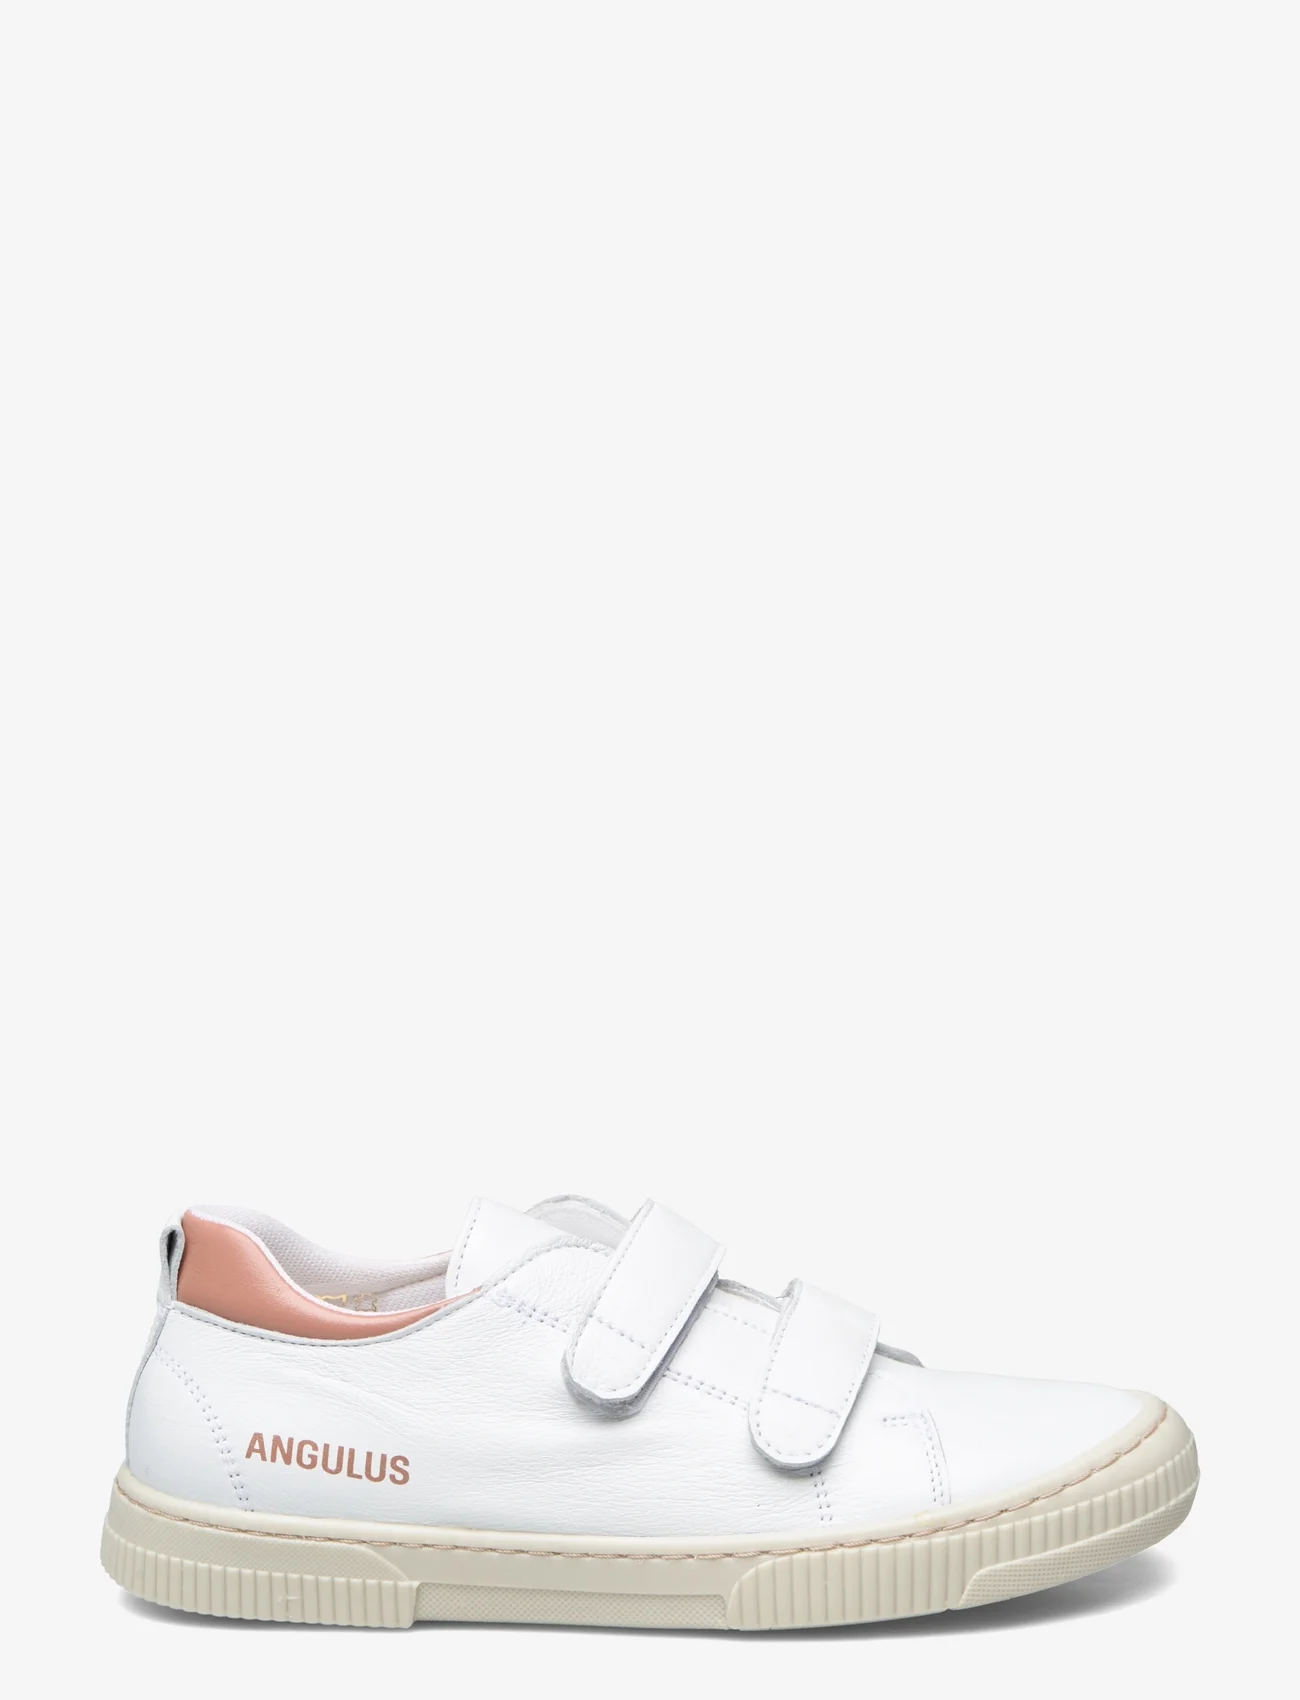 ANGULUS - Shoes - flat - with velcro - gode sommertilbud - 1521/1470 white/d.peach - 1